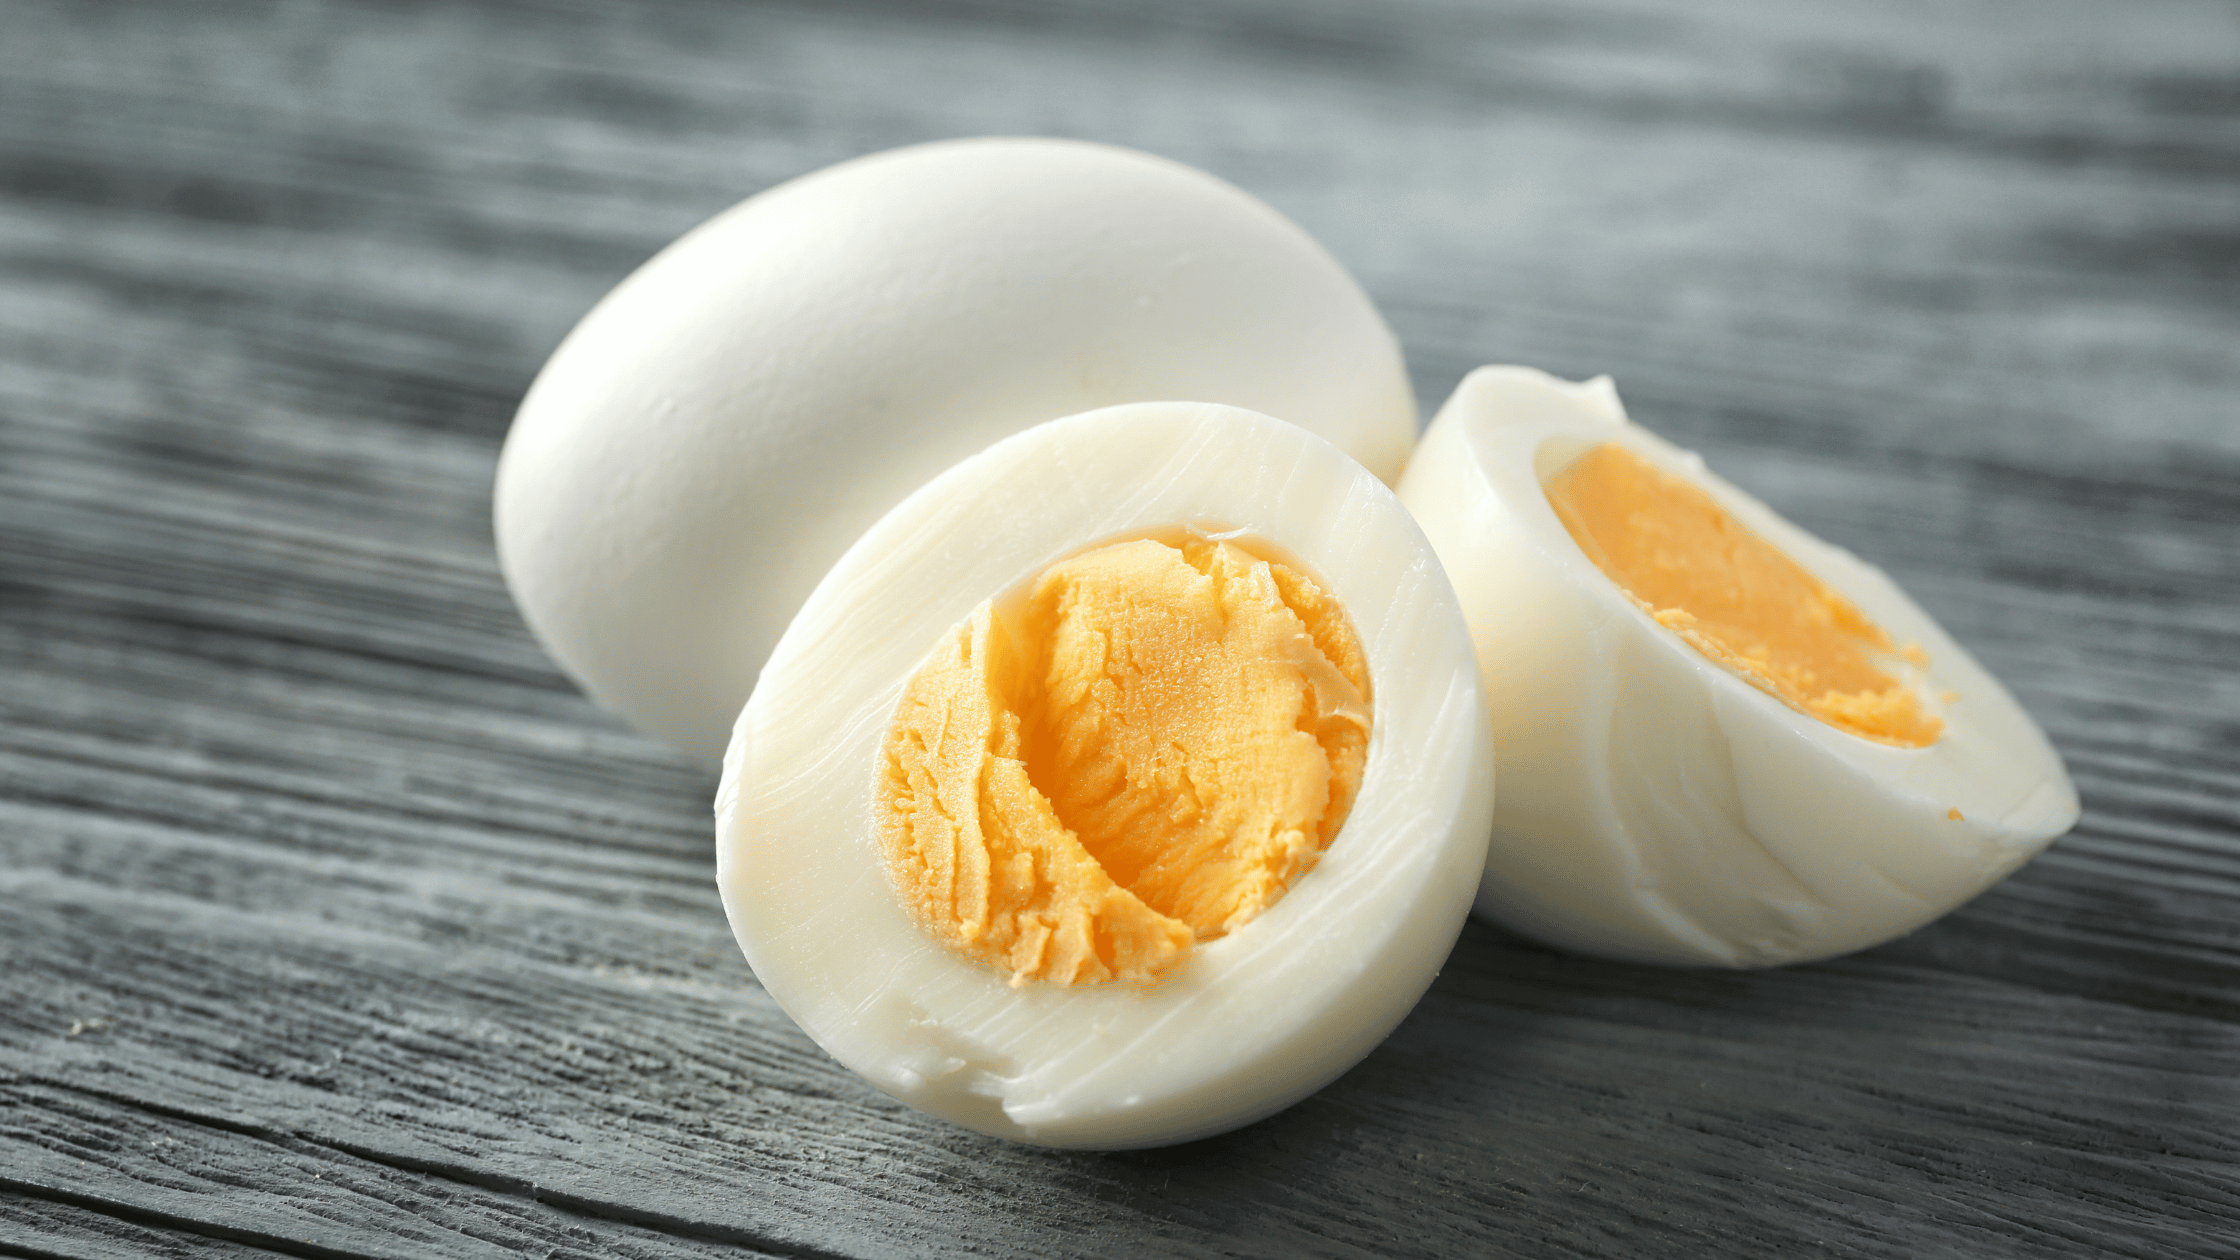 Foods For Runners Hit Protein Goals Eggs